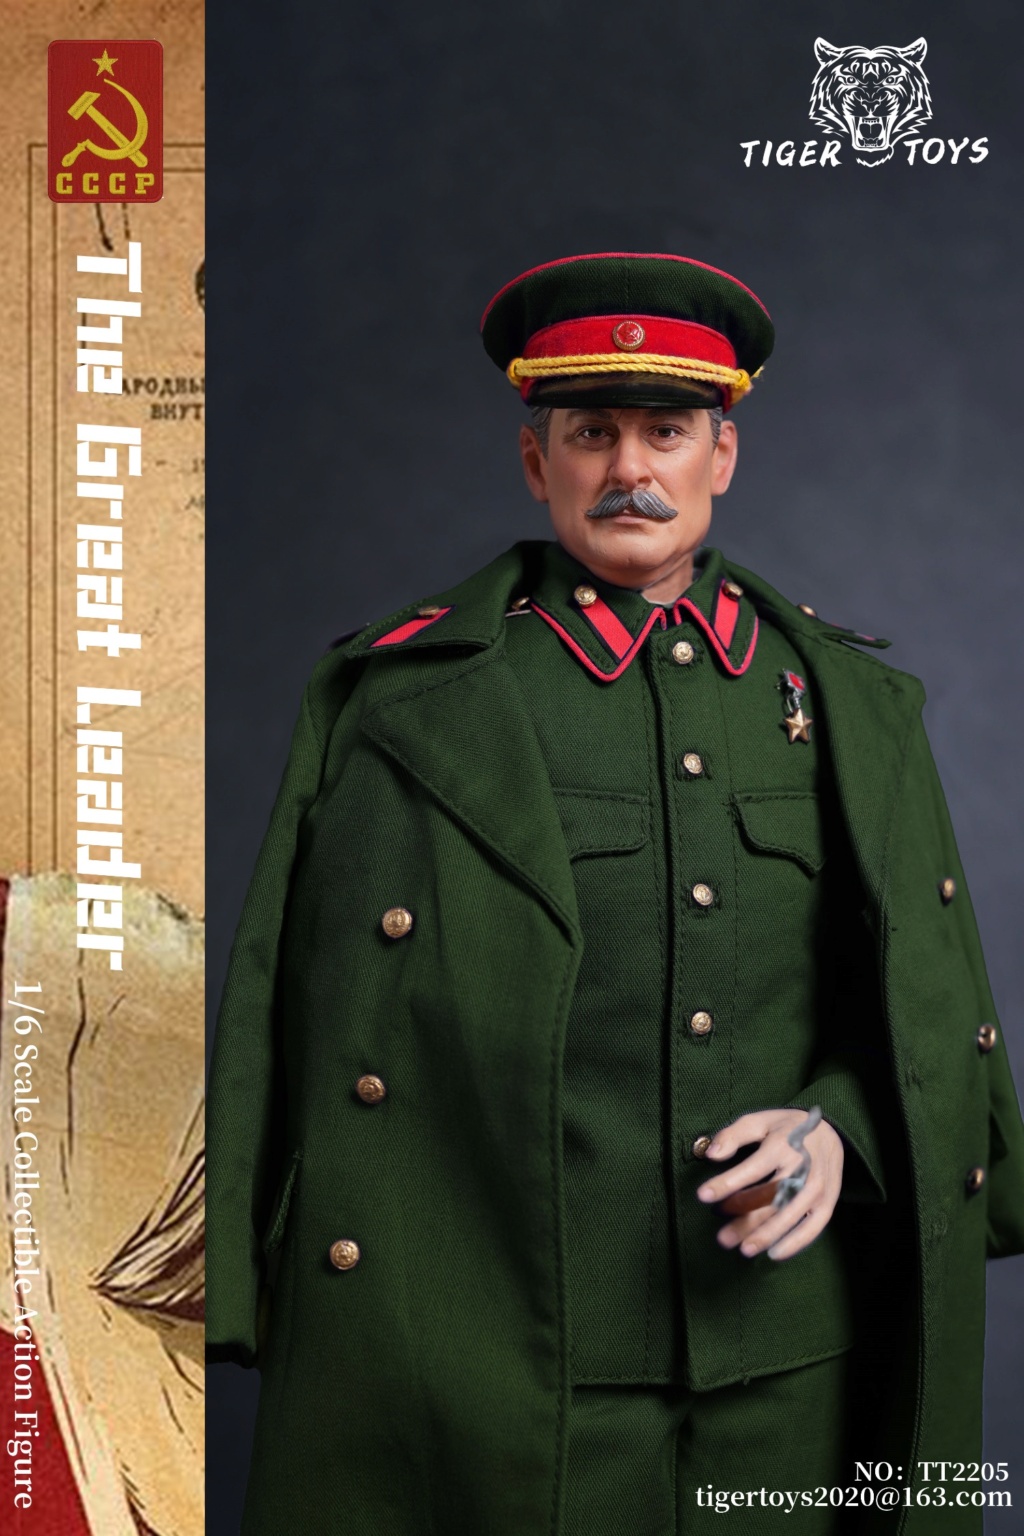 newproduct - NEW PRODUCT: Tigertoys: 1 / 6 scale Soviet leader Stalin 13565910